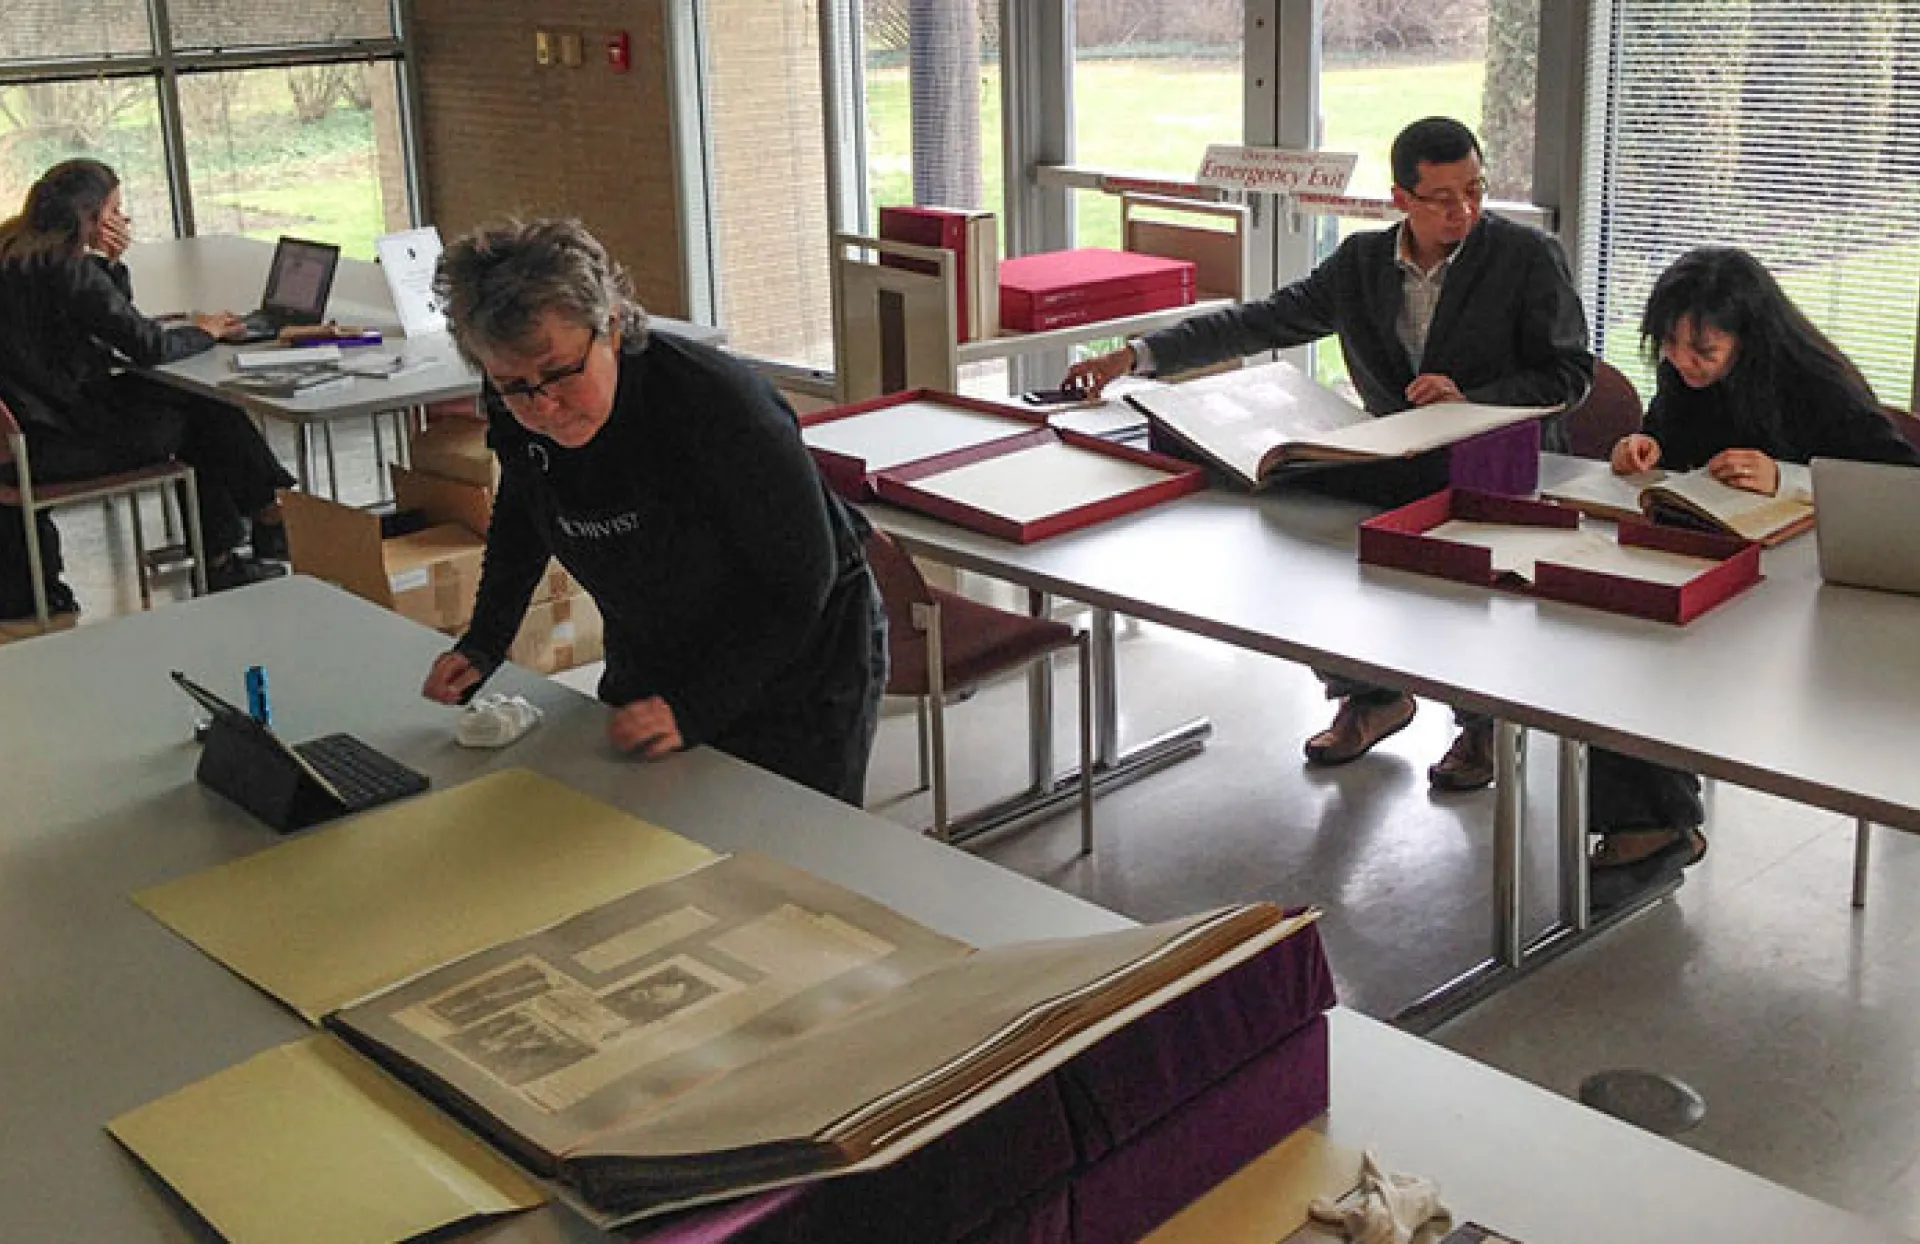 Researchers in the library looking at historic books